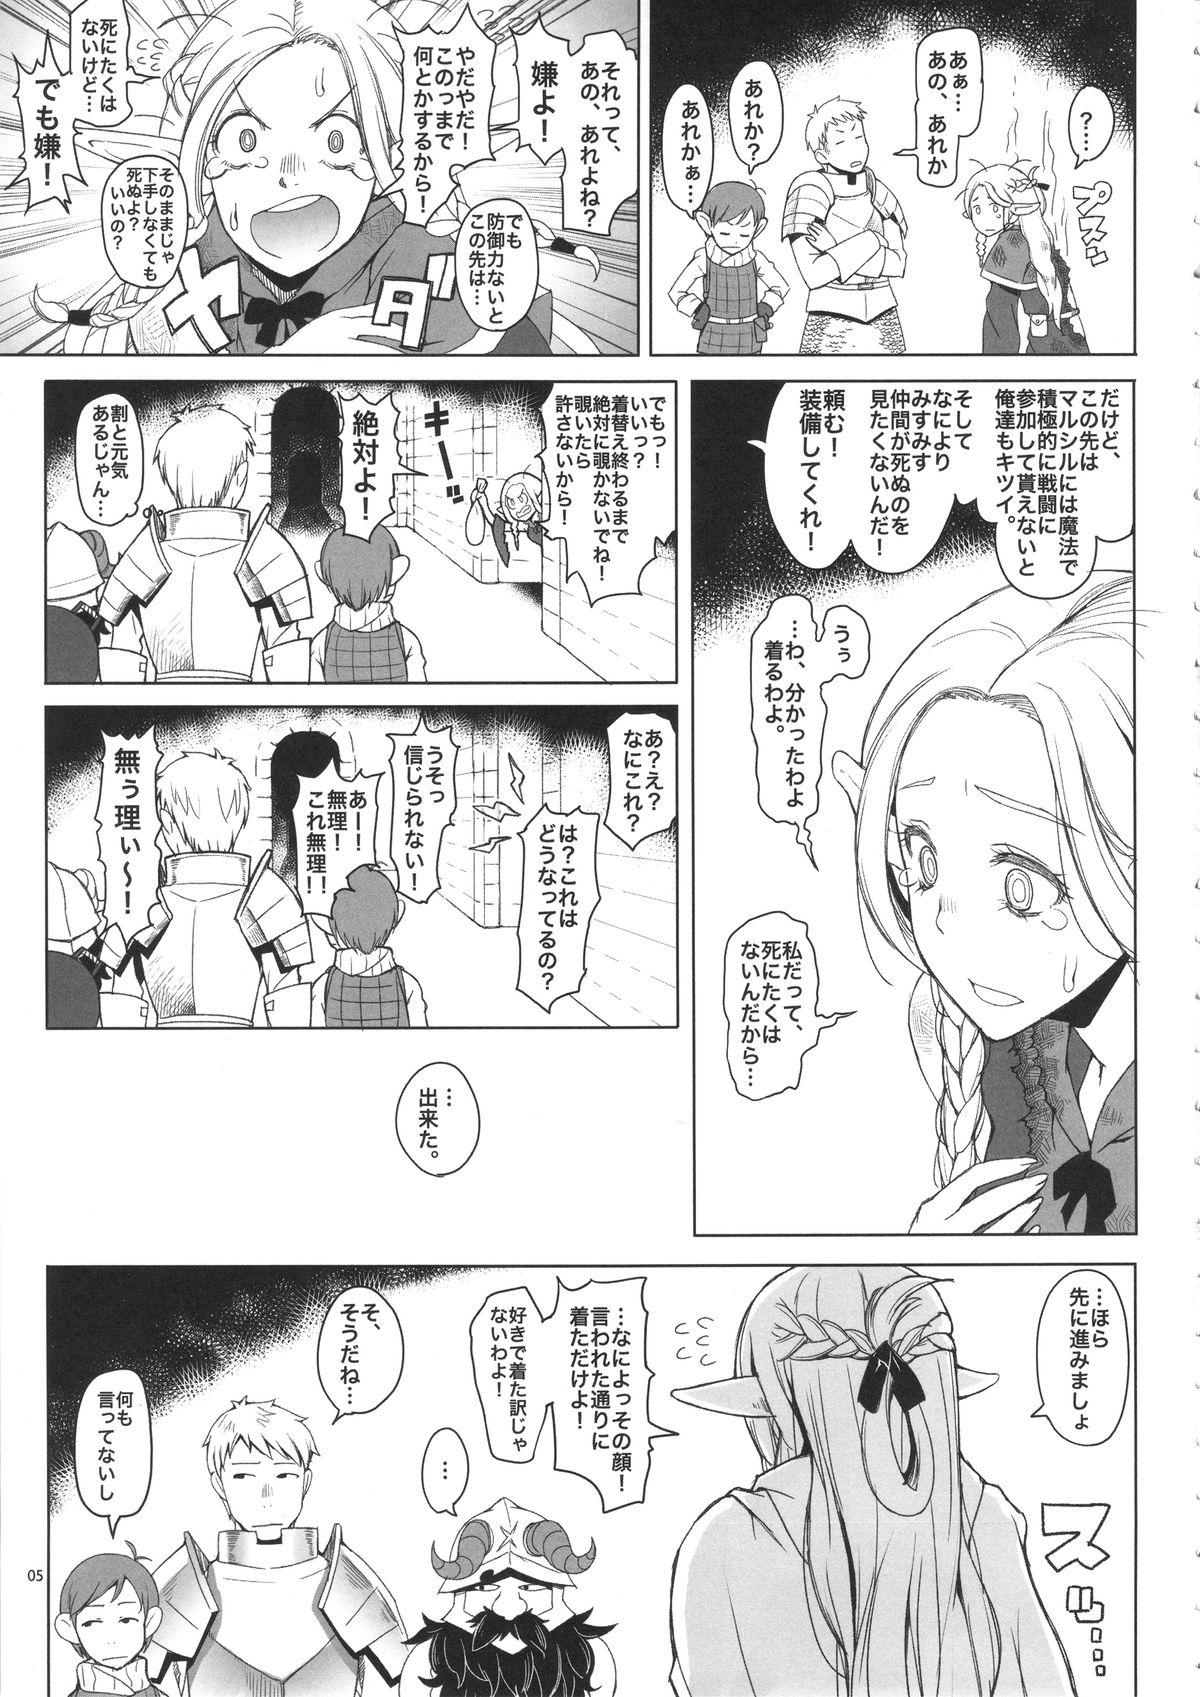 Chaturbate Marcille Meshi - Dungeon meshi Unshaved - Page 4